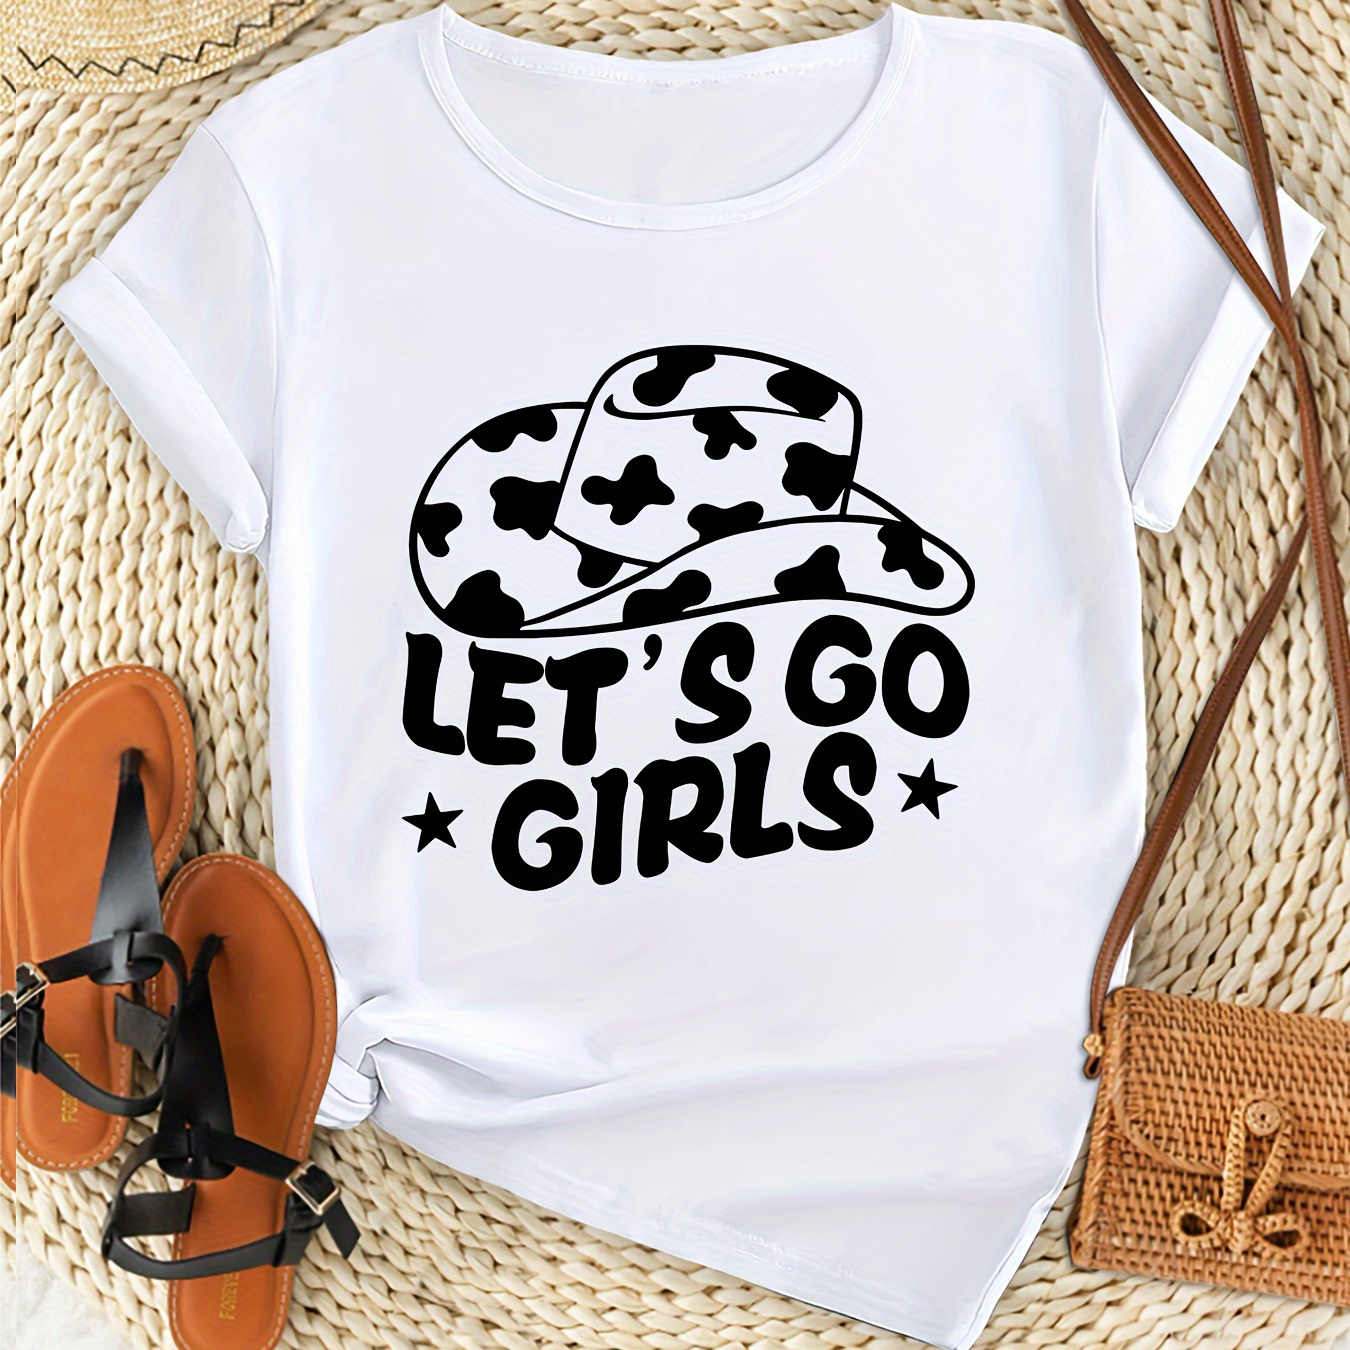 

Women's Plus Size Casual Sporty T-shirt, Cowgirl Cowboy Hat And Spots Print, Comfort Fit Short Sleeve Tee, Fashion Breathable Casual Top